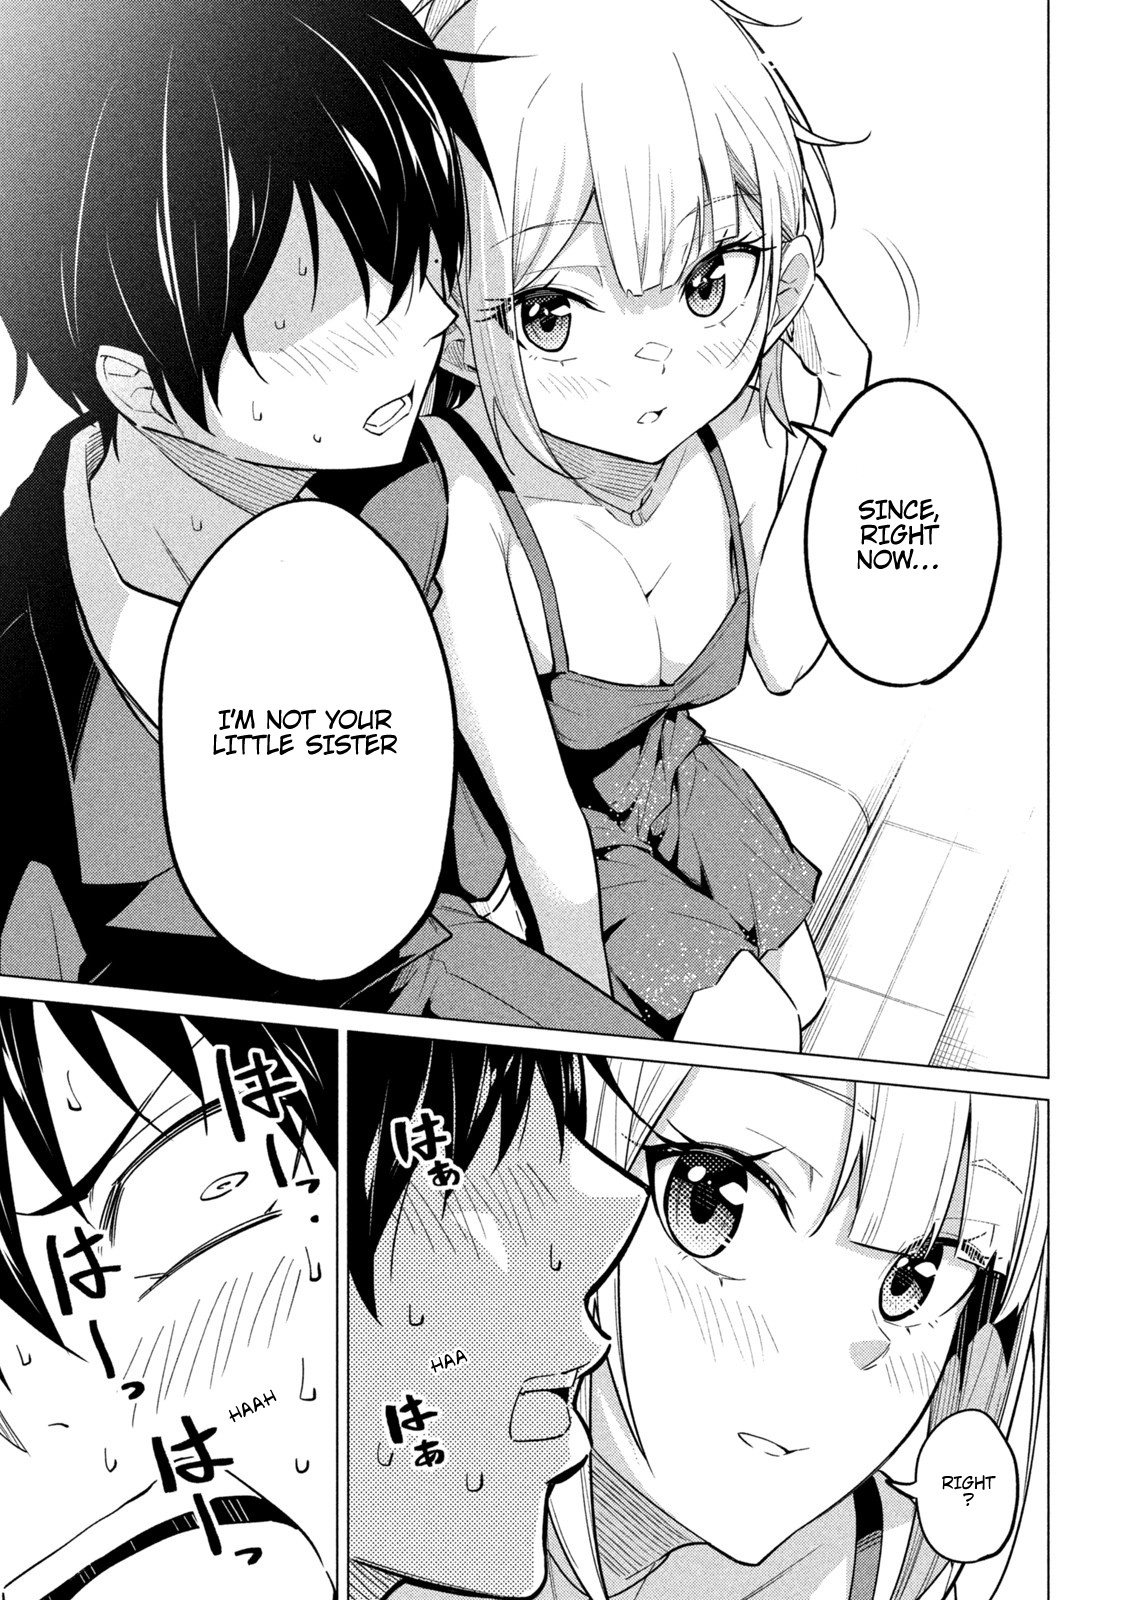 Home Cabaret ~Operation: Making A Cabaret Club At Home So Nii-Chan Can Get Used To Girls~ Chapter 2 #26